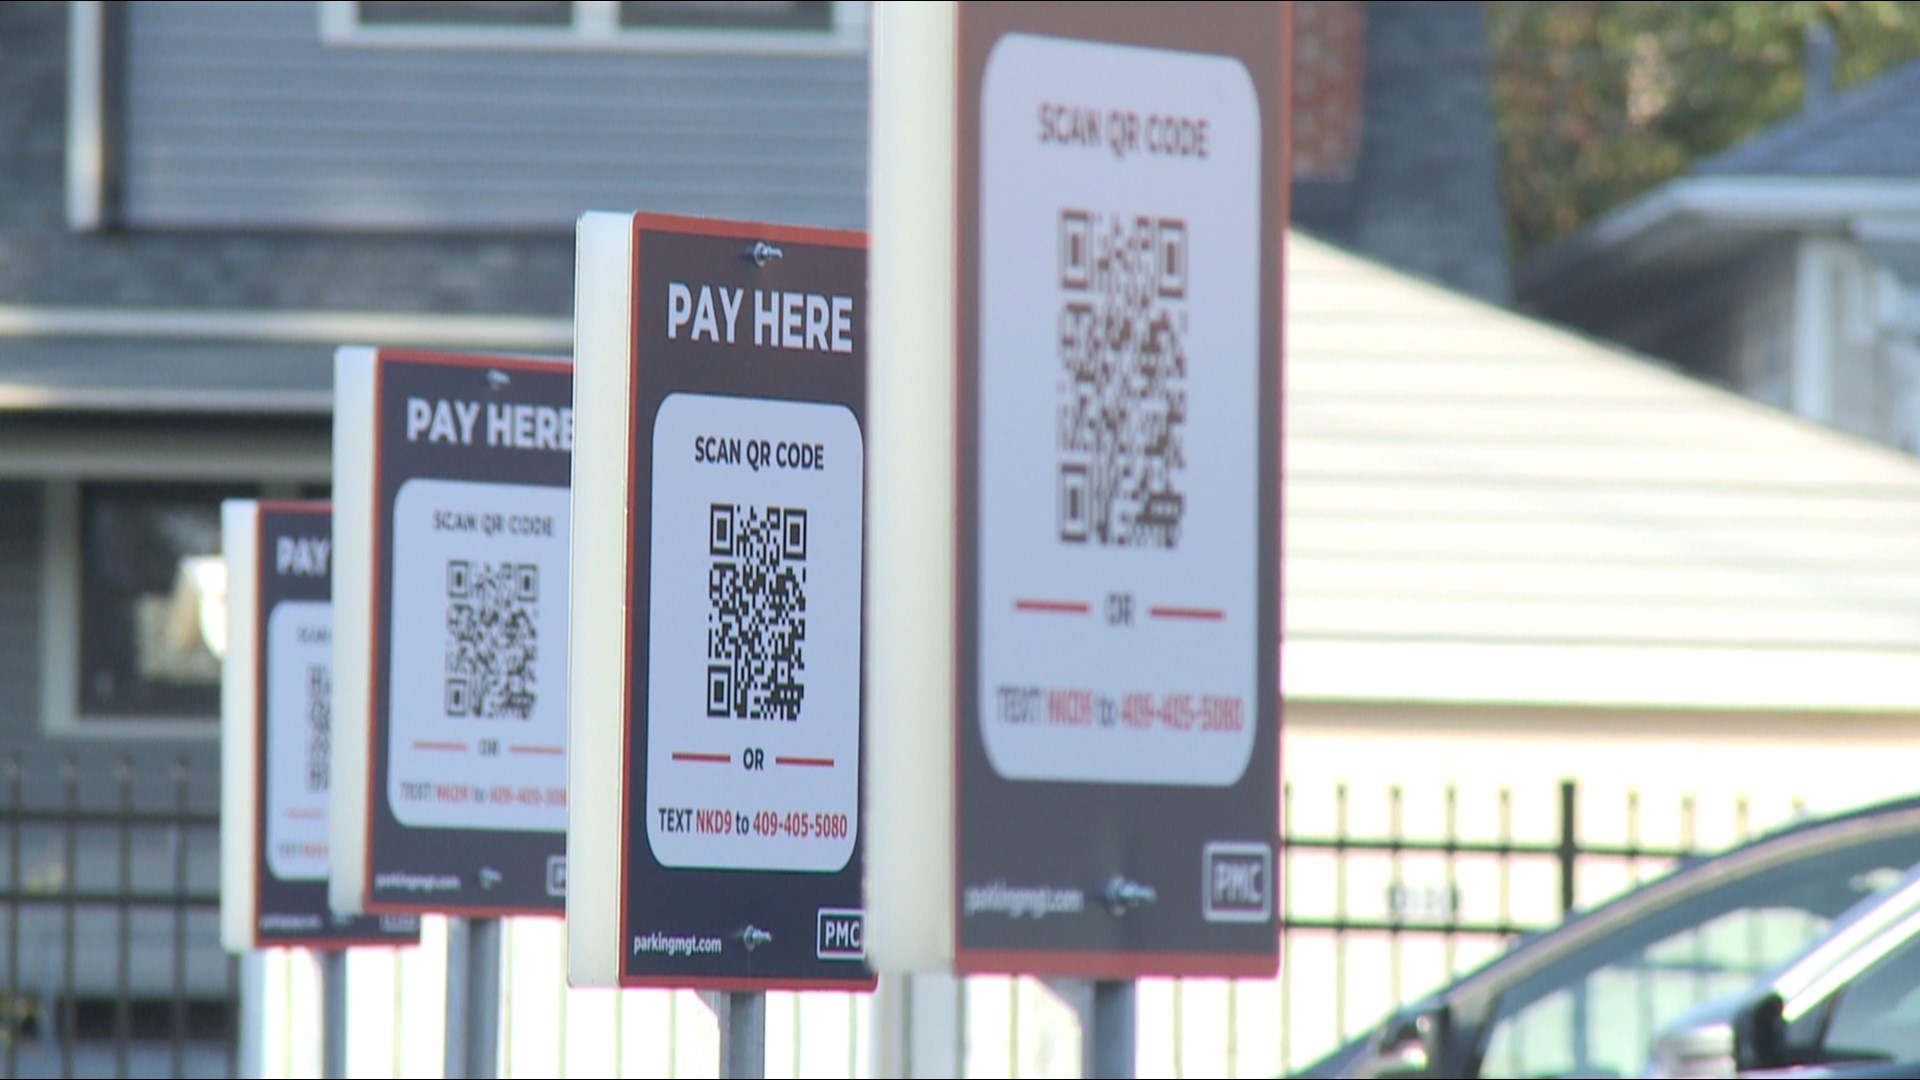 Although these QR code marked parking lots are expensive, they have some appeal to Louisville property owners.